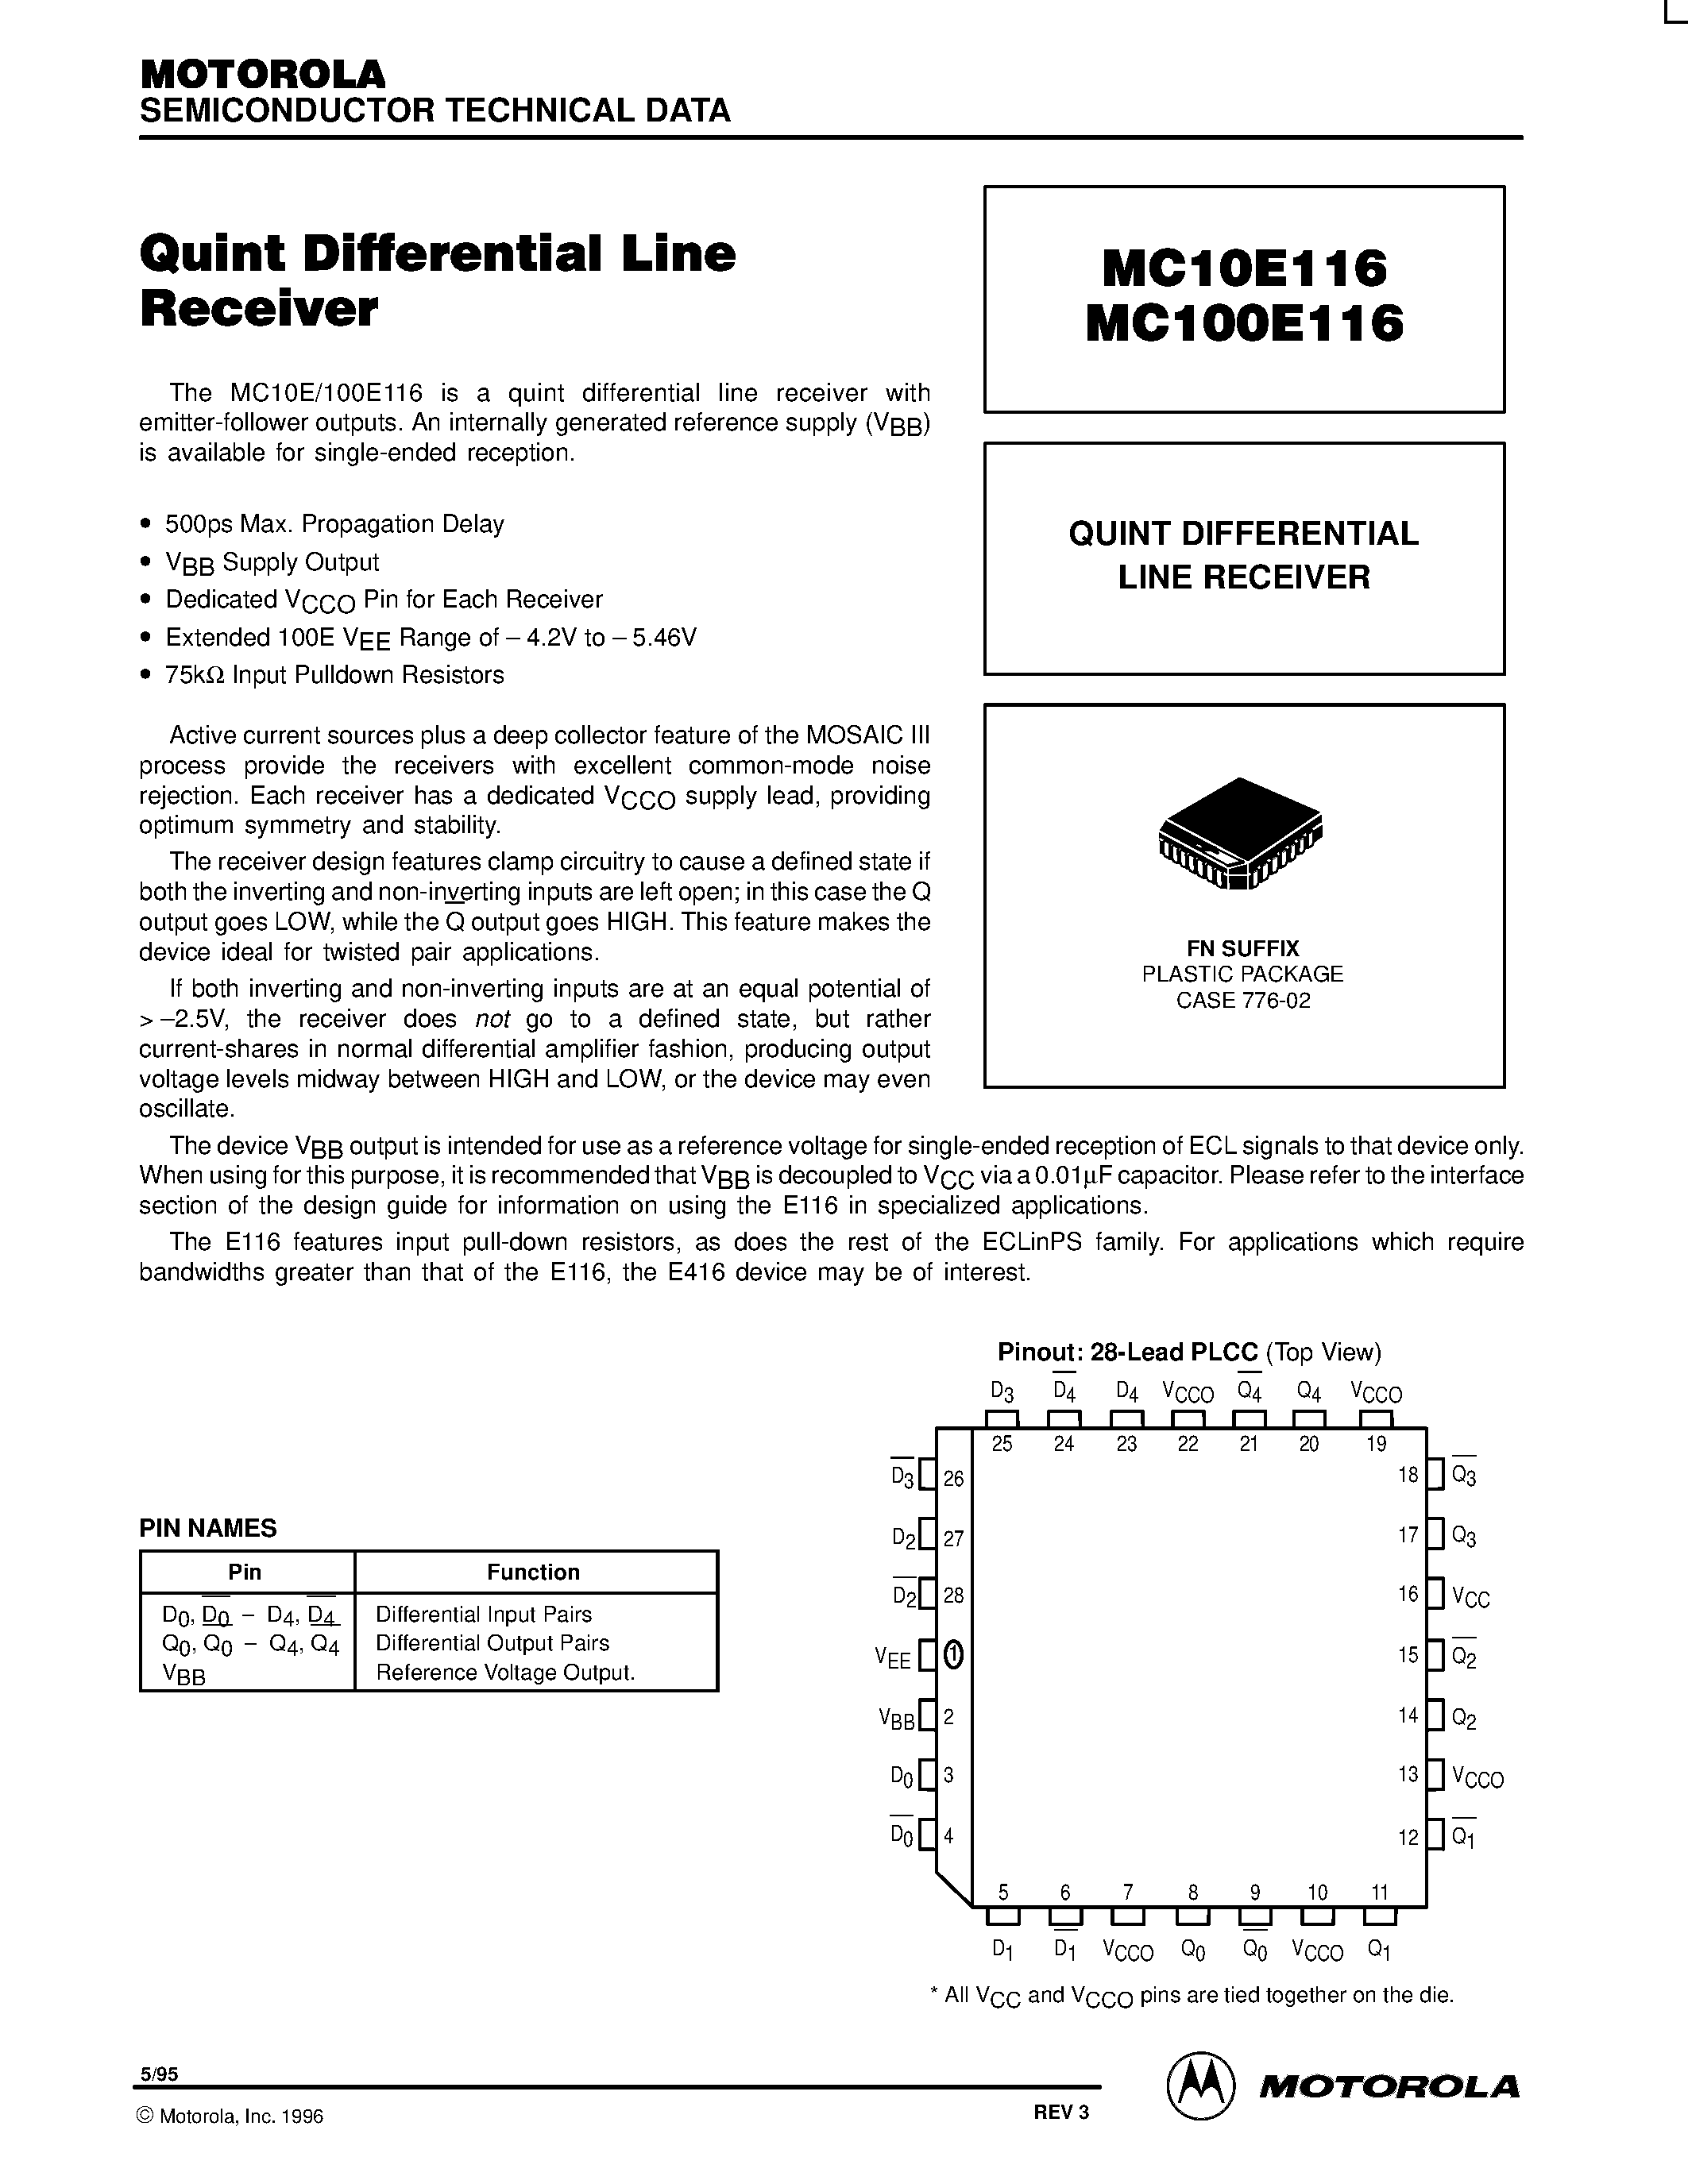 Datasheet MC100E116FN - QUINT DIFFERENTIAL LINE RECEIVER page 1